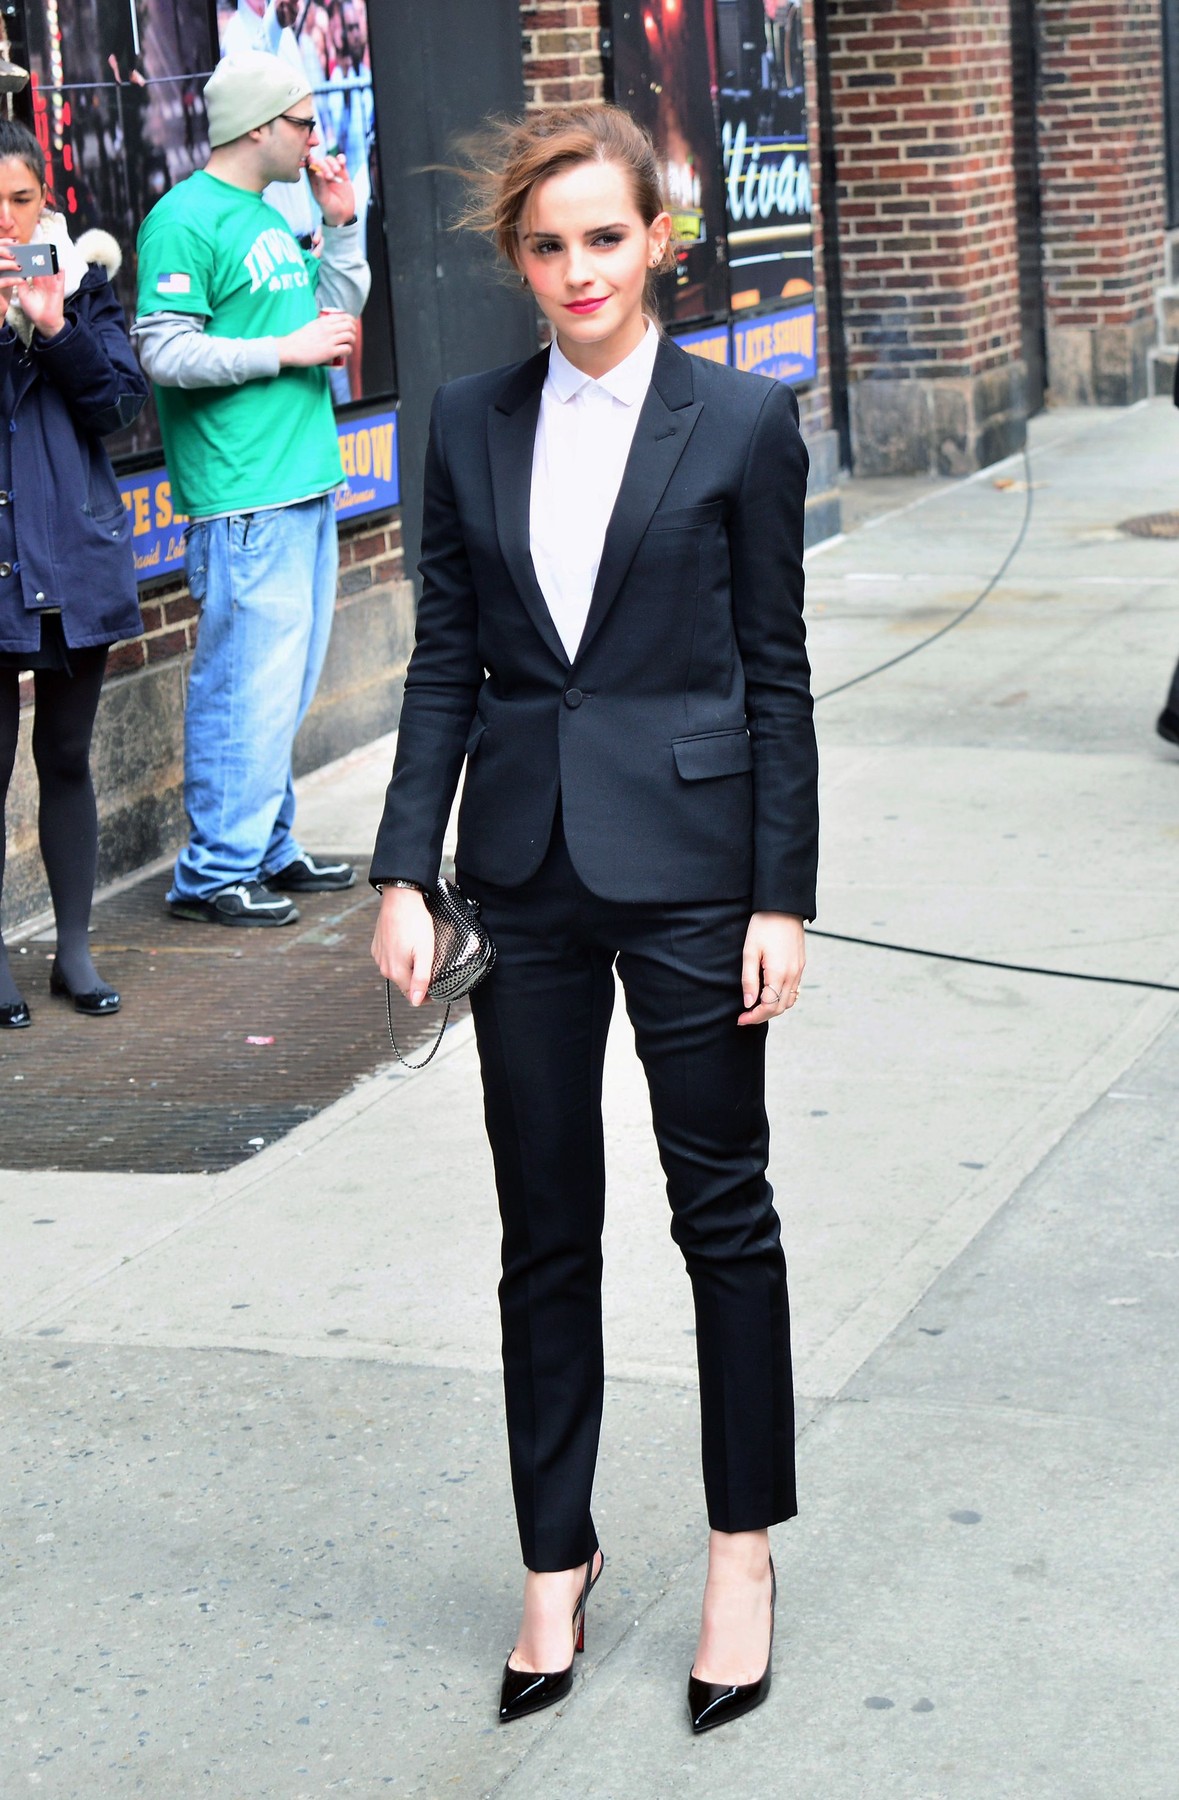 Mandatory Credit: Photo by Henry Lamb/Photowire/BEImages (1944099f)
Emma Watson
'Late Show with David Letterman', New York, America - 25 Mar 2014, Image: 188541558, License: Rights-managed, Restrictions: , Model Release: no, Credit line: Henry Lamb/Photowire/BEImages / BEImages / Profimedia